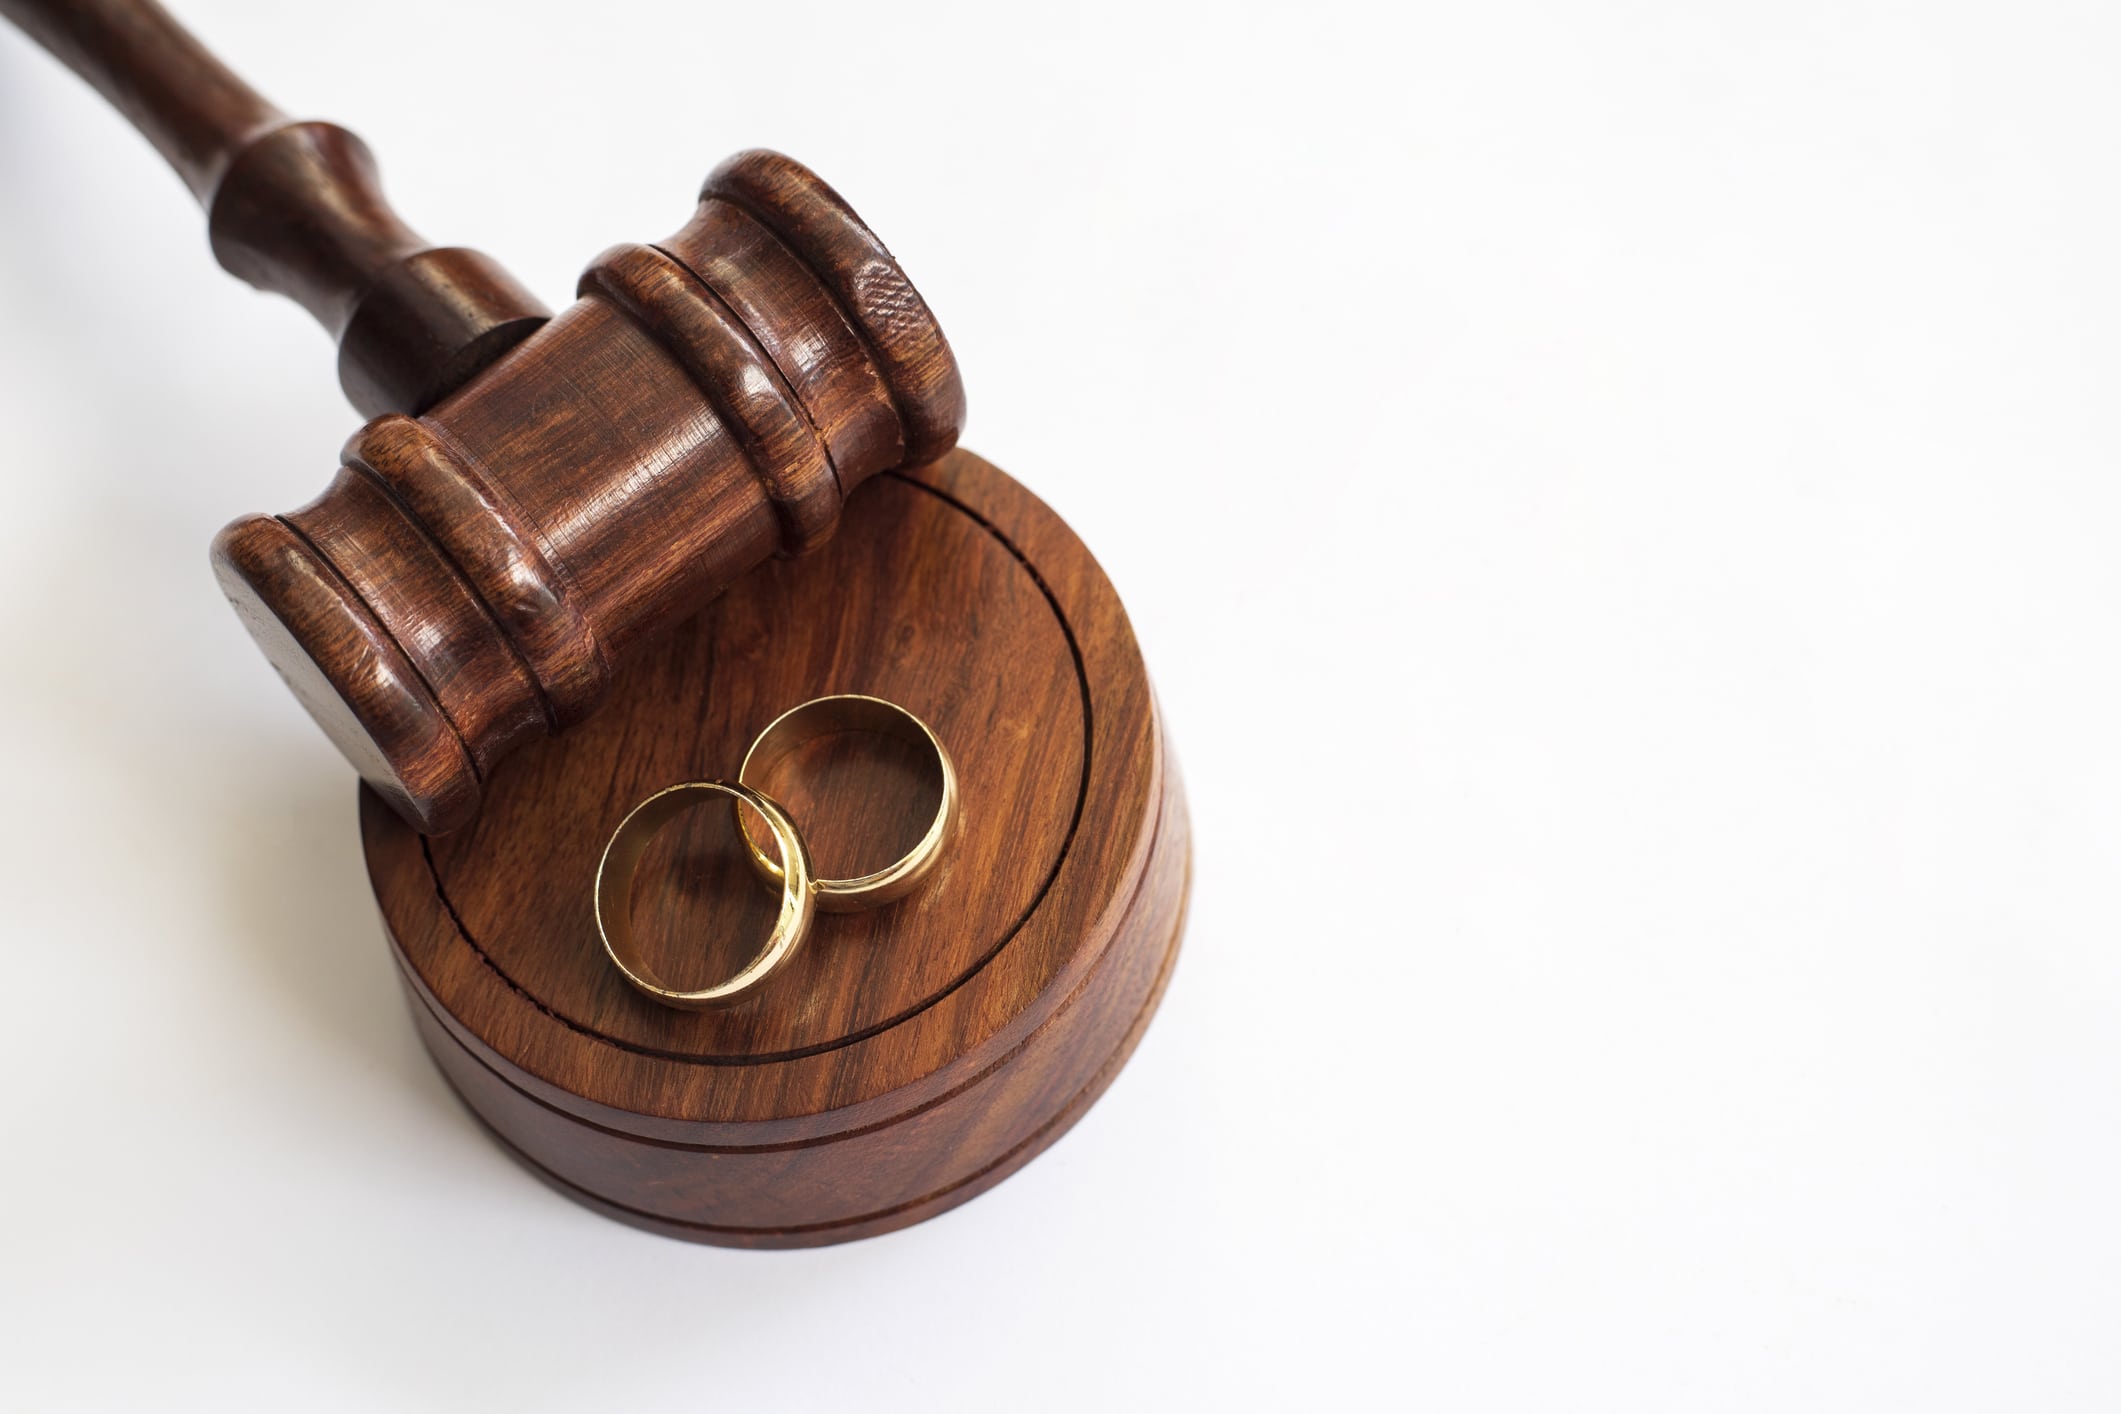 Wooden gavel and wedding rings on white background Directly above